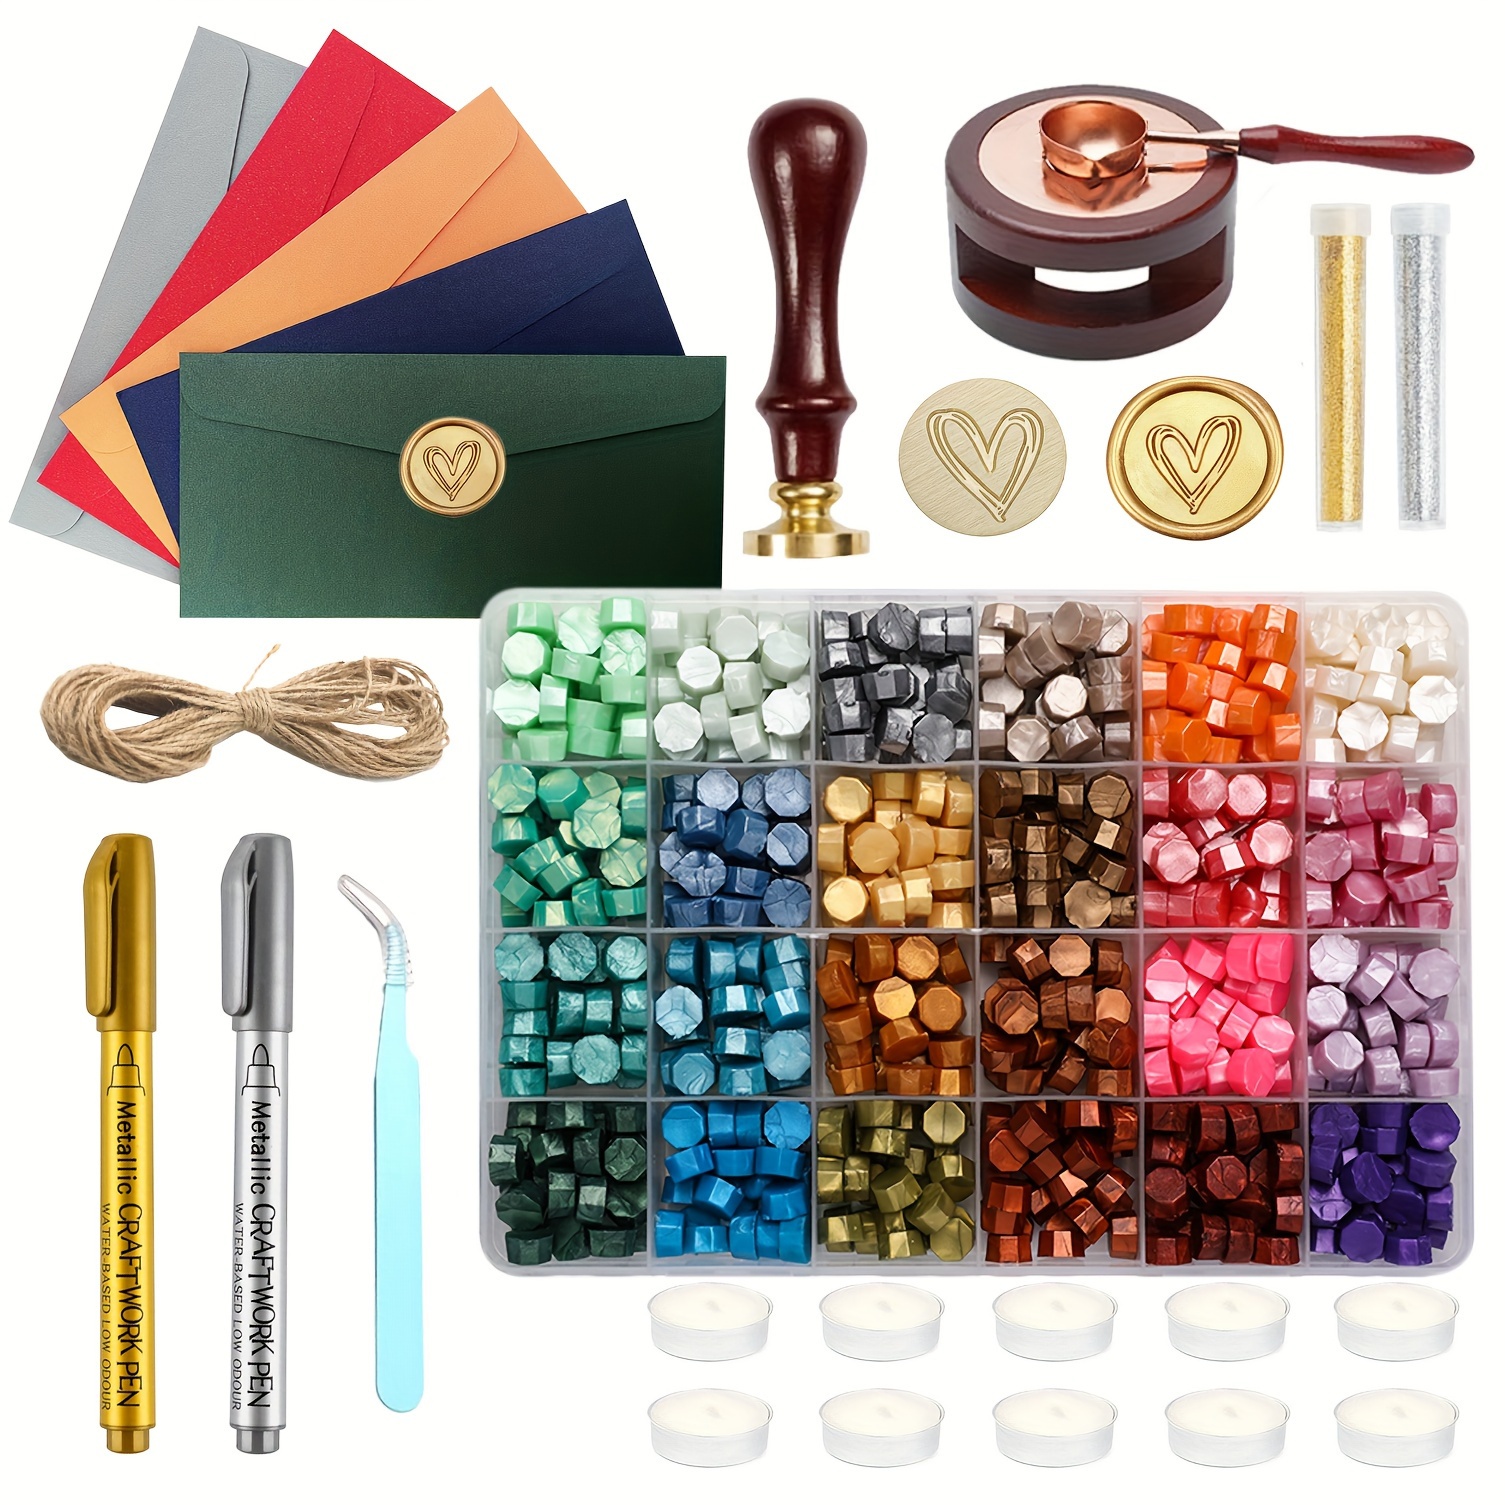 

600pcs Wax Seal Kit With Heart Stamp And Gift Box, Metallic Pen, Envelopes, Candles, Glitter, Warmer, Spoon - Complete Set For Wedding Invitations, Gift Packaging, Craft Projects